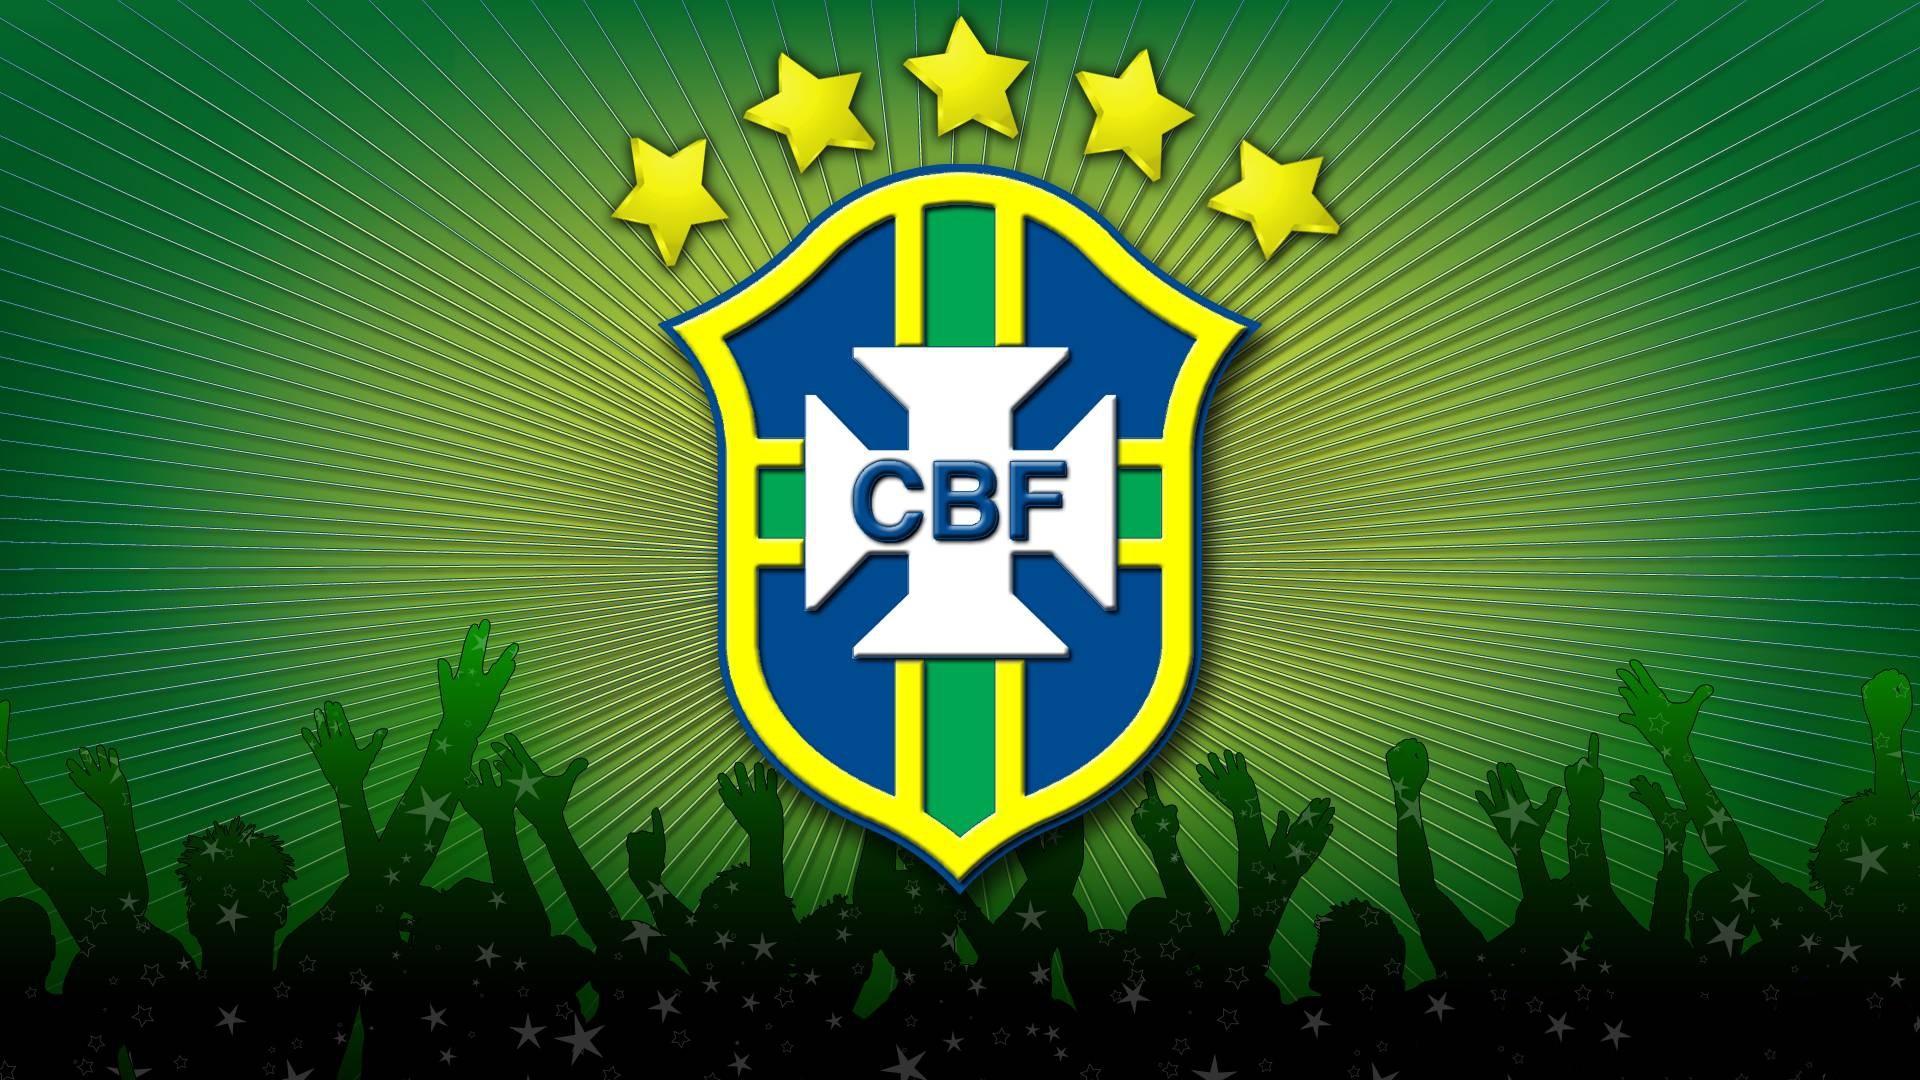 1920x1080 ... Brazil Soccer Wallpaper - Android Apps on Google Play ...